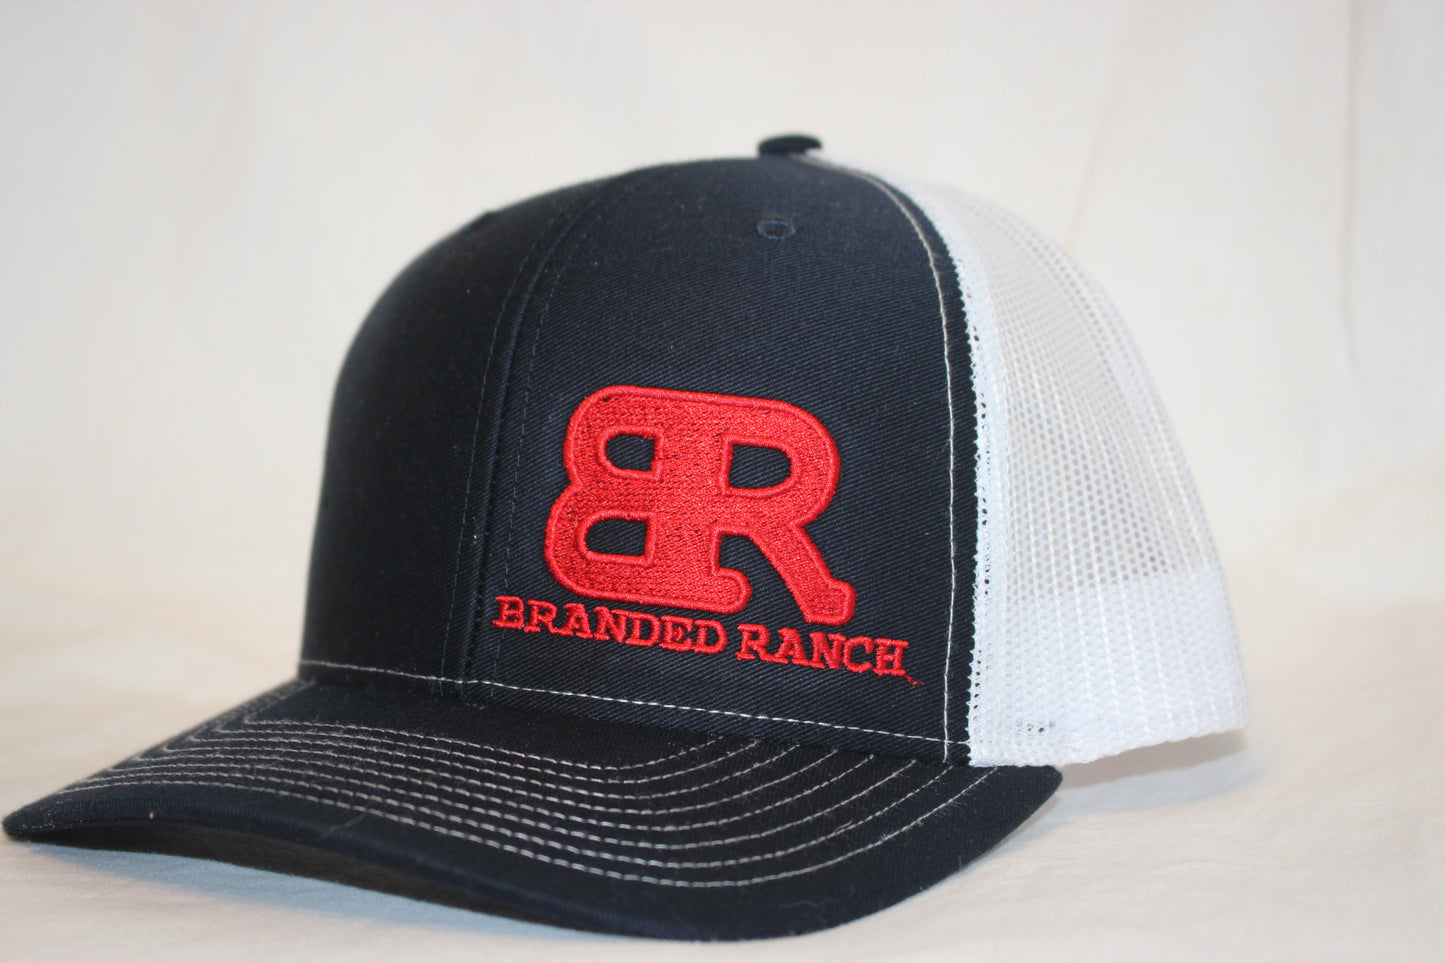 Branded Ranch Navy and White Snapback